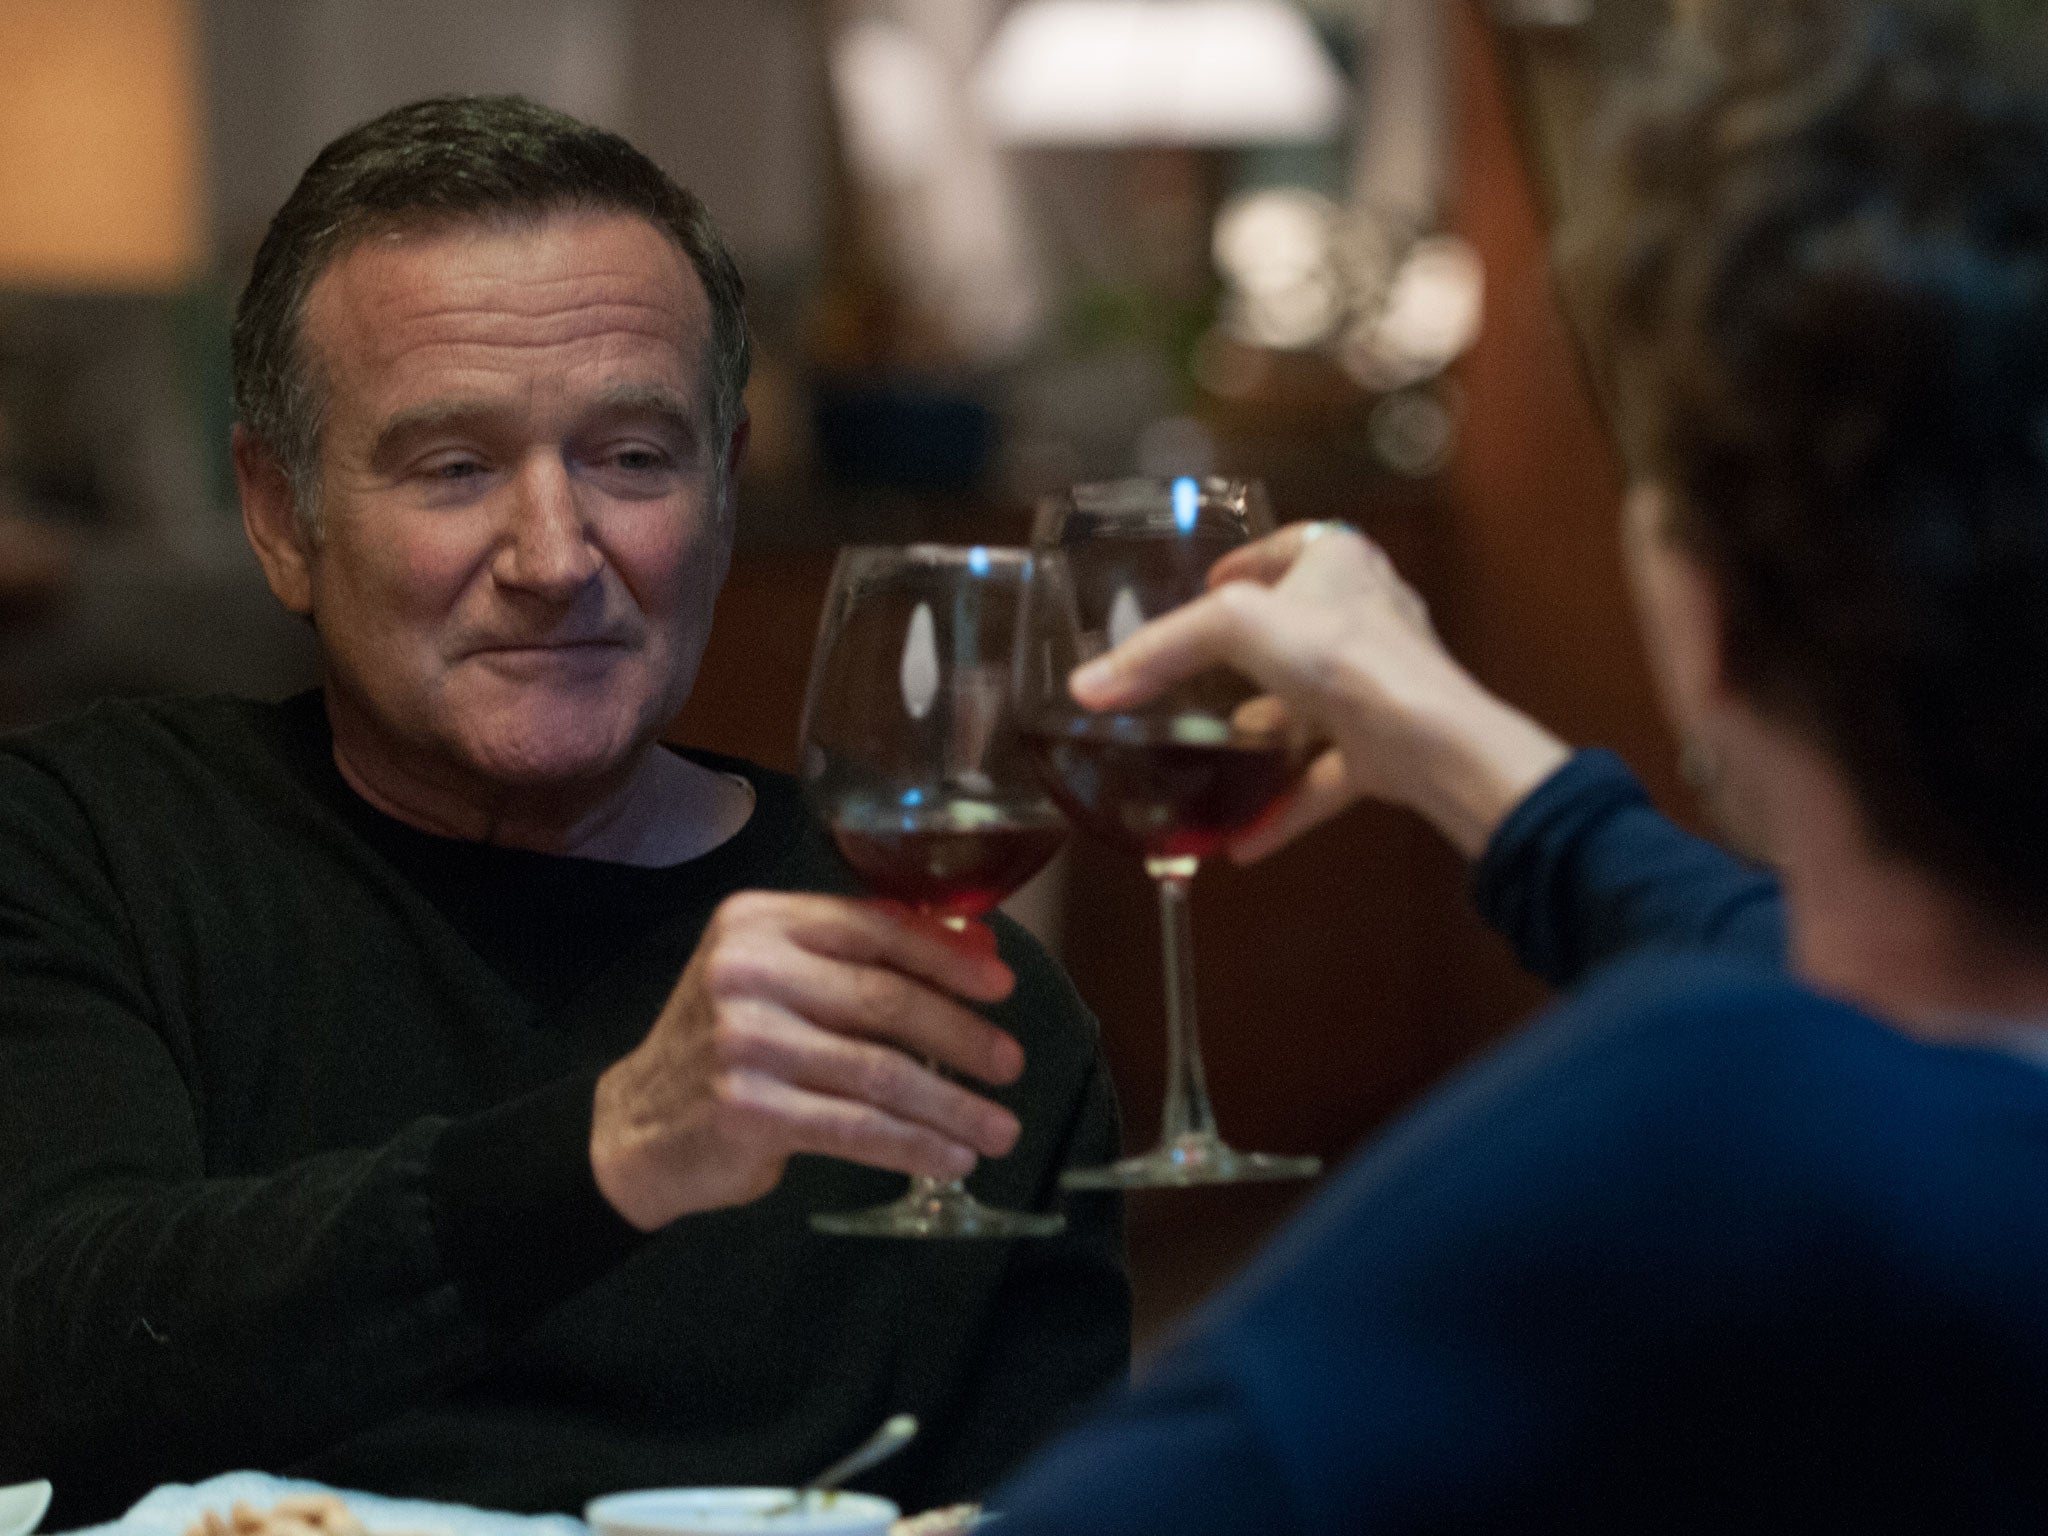 Robin Williams gives a poignant performance in Face of Love